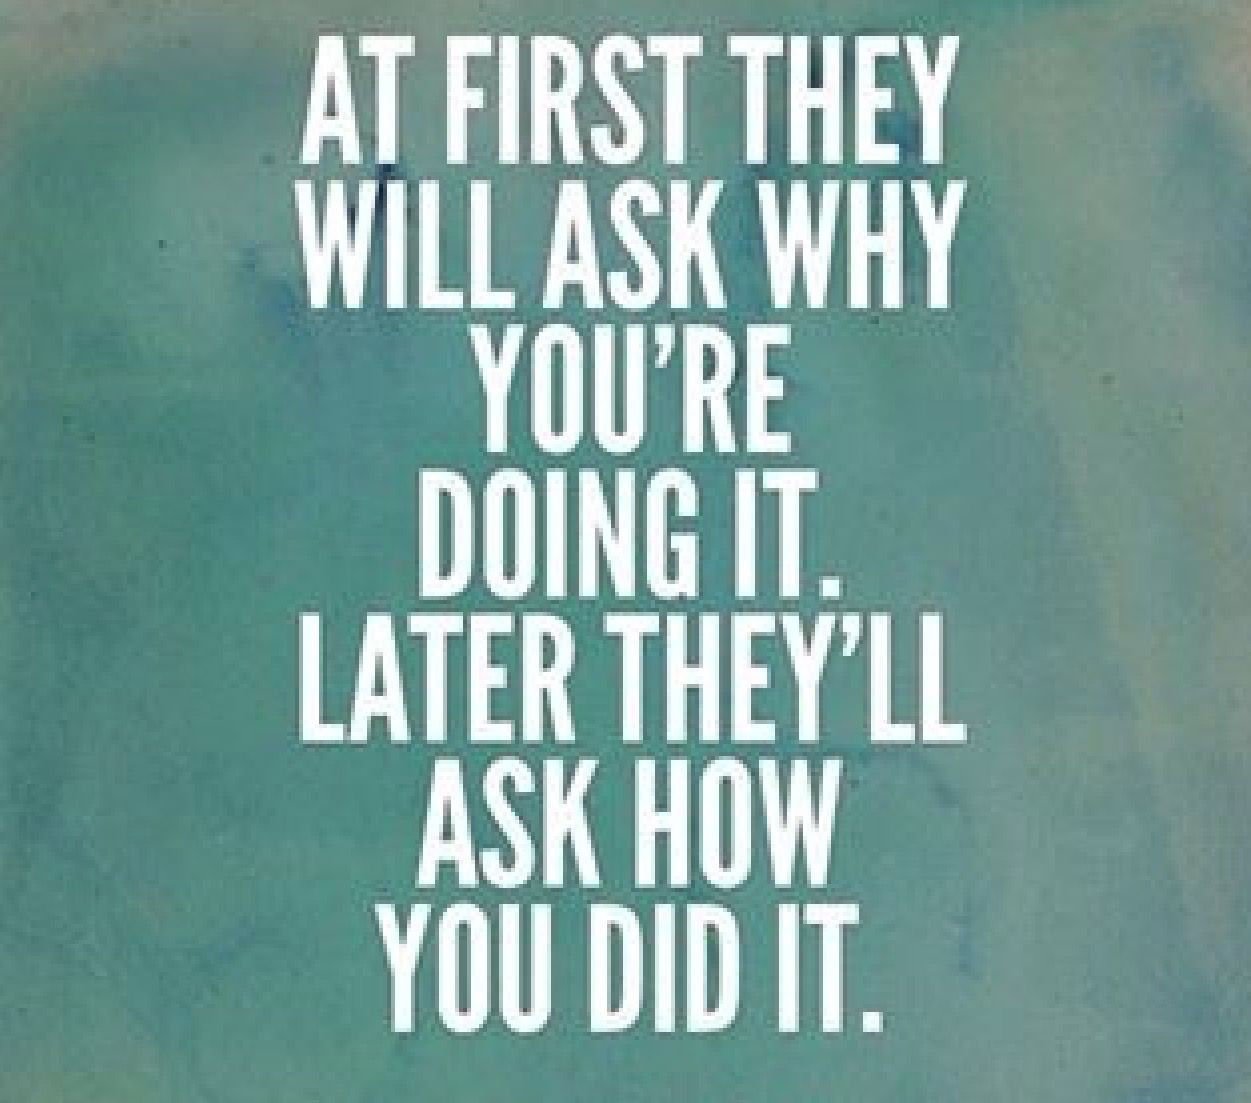 Positive Quotes For Success
 At first they will ask why you re doing it Later they ll